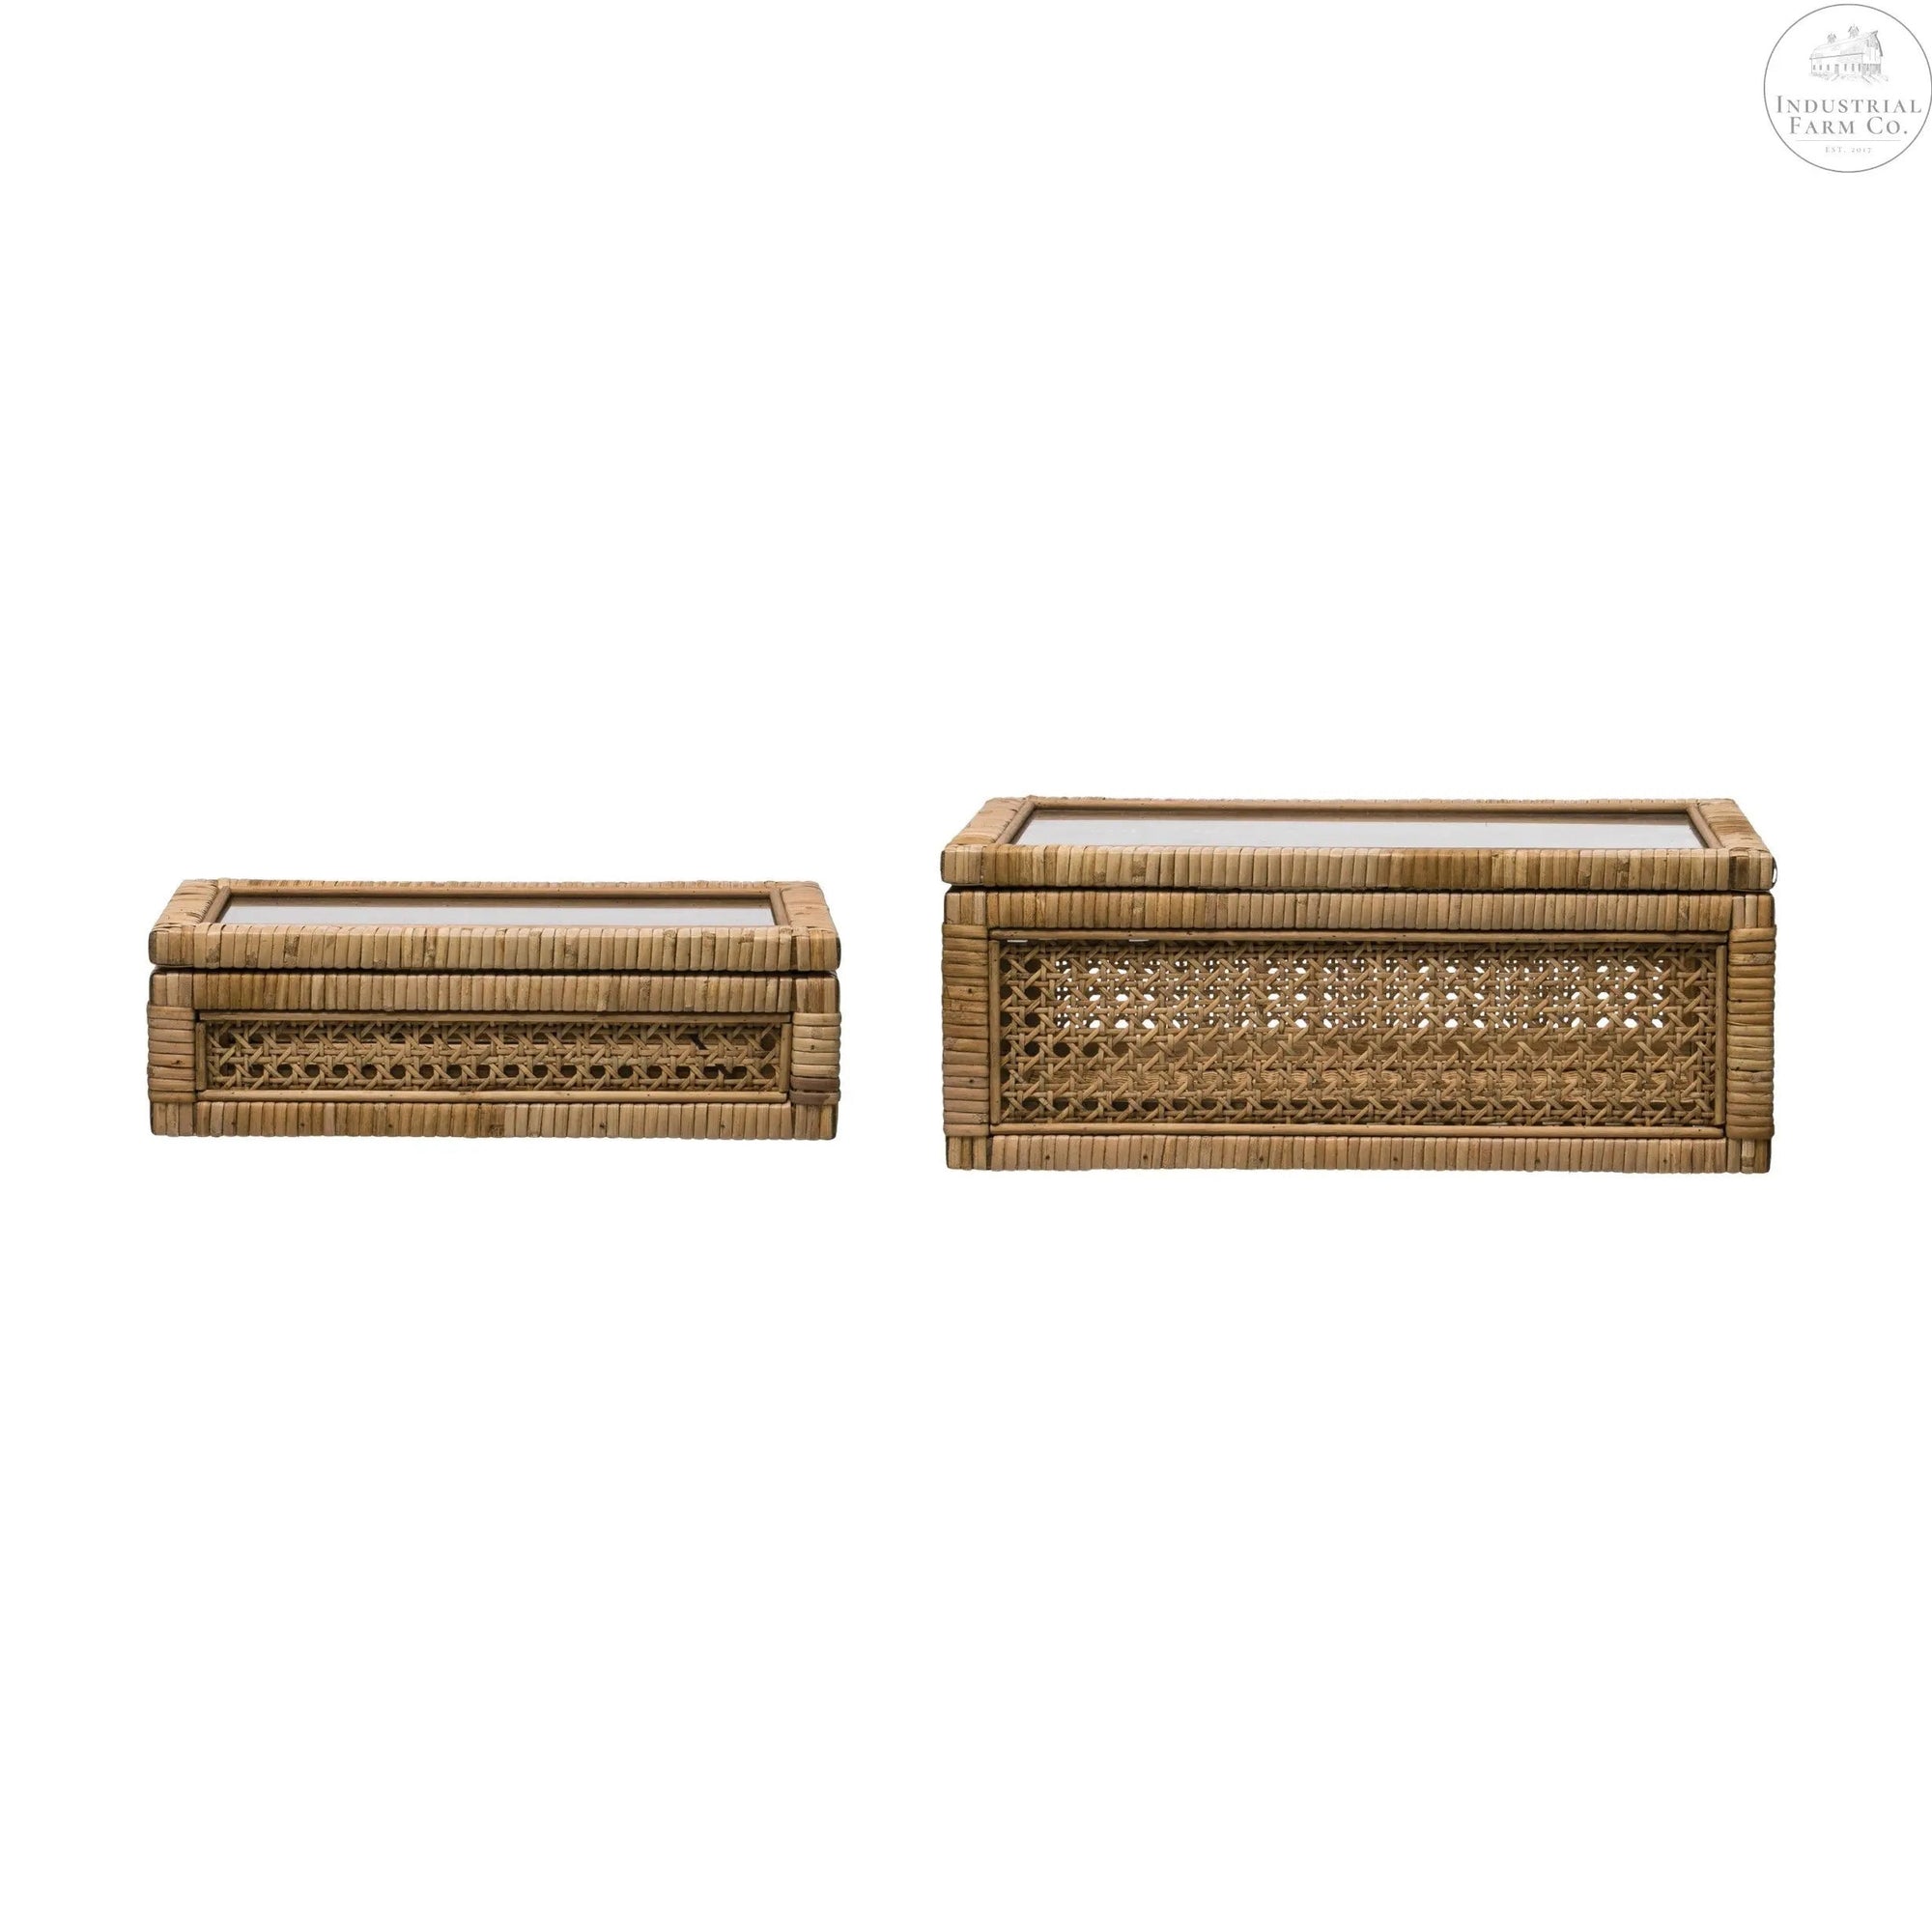 Rattan Display Box with Glass Lid - Set of Two     | Industrial Farm Co